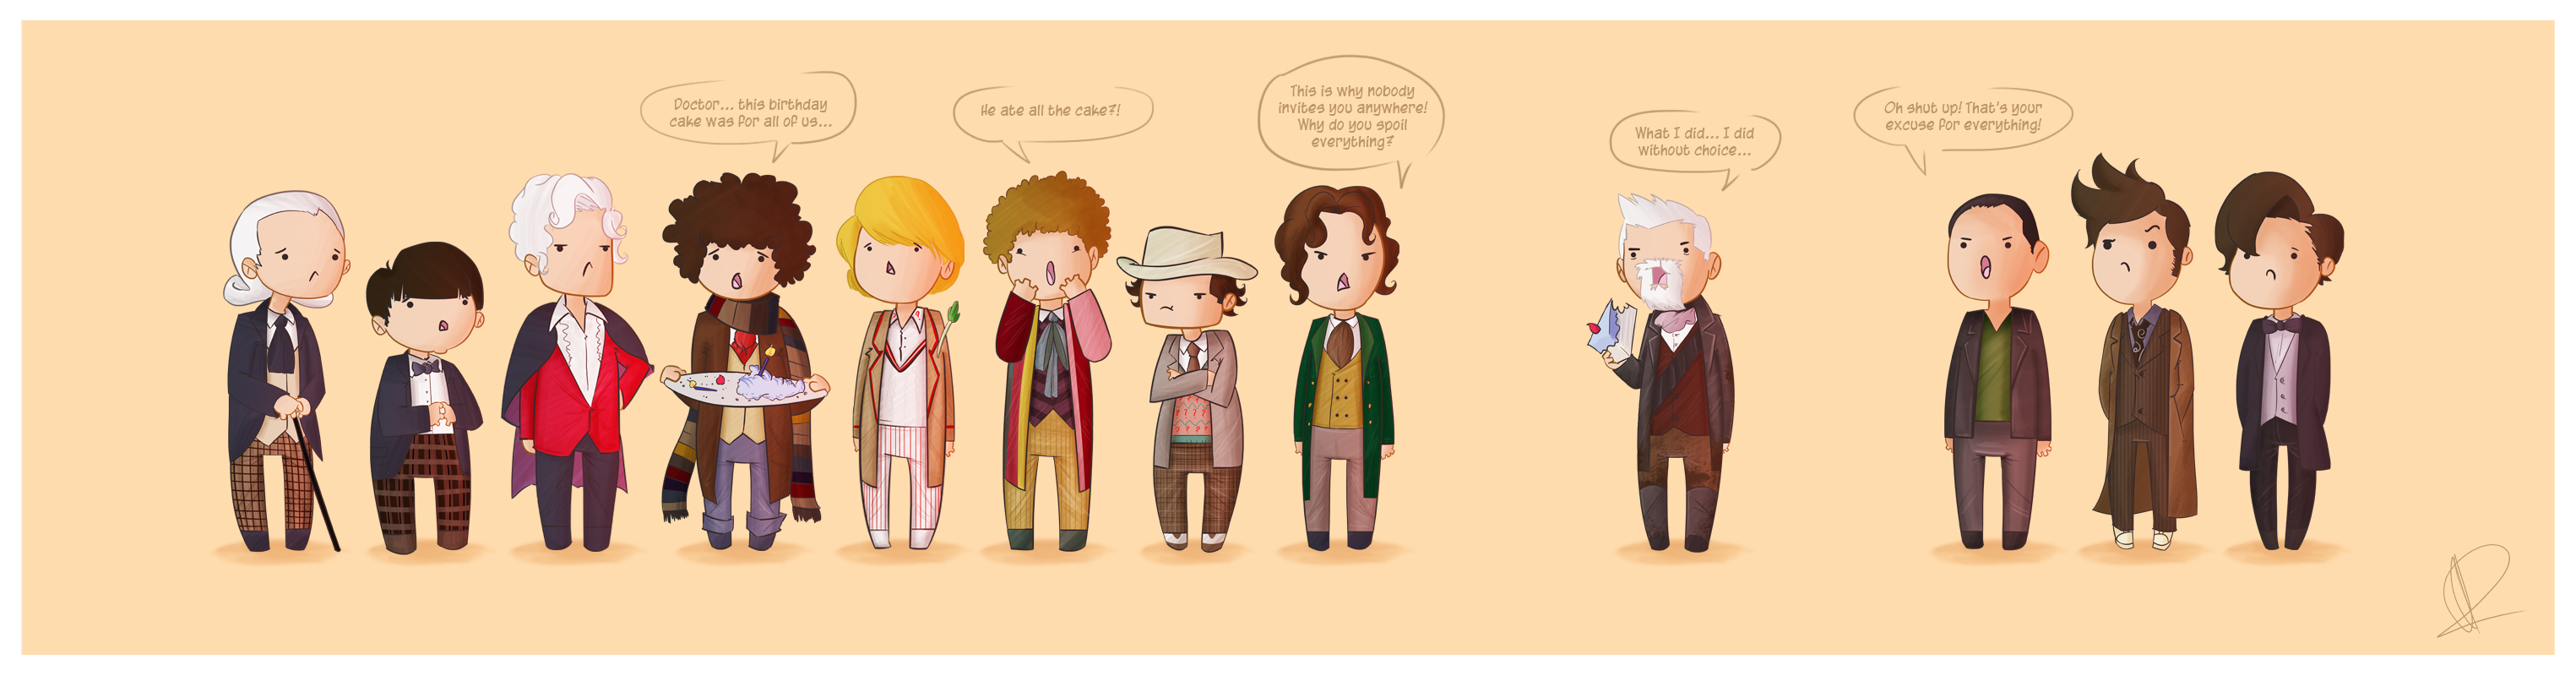 Doctor Who Th Anniversary